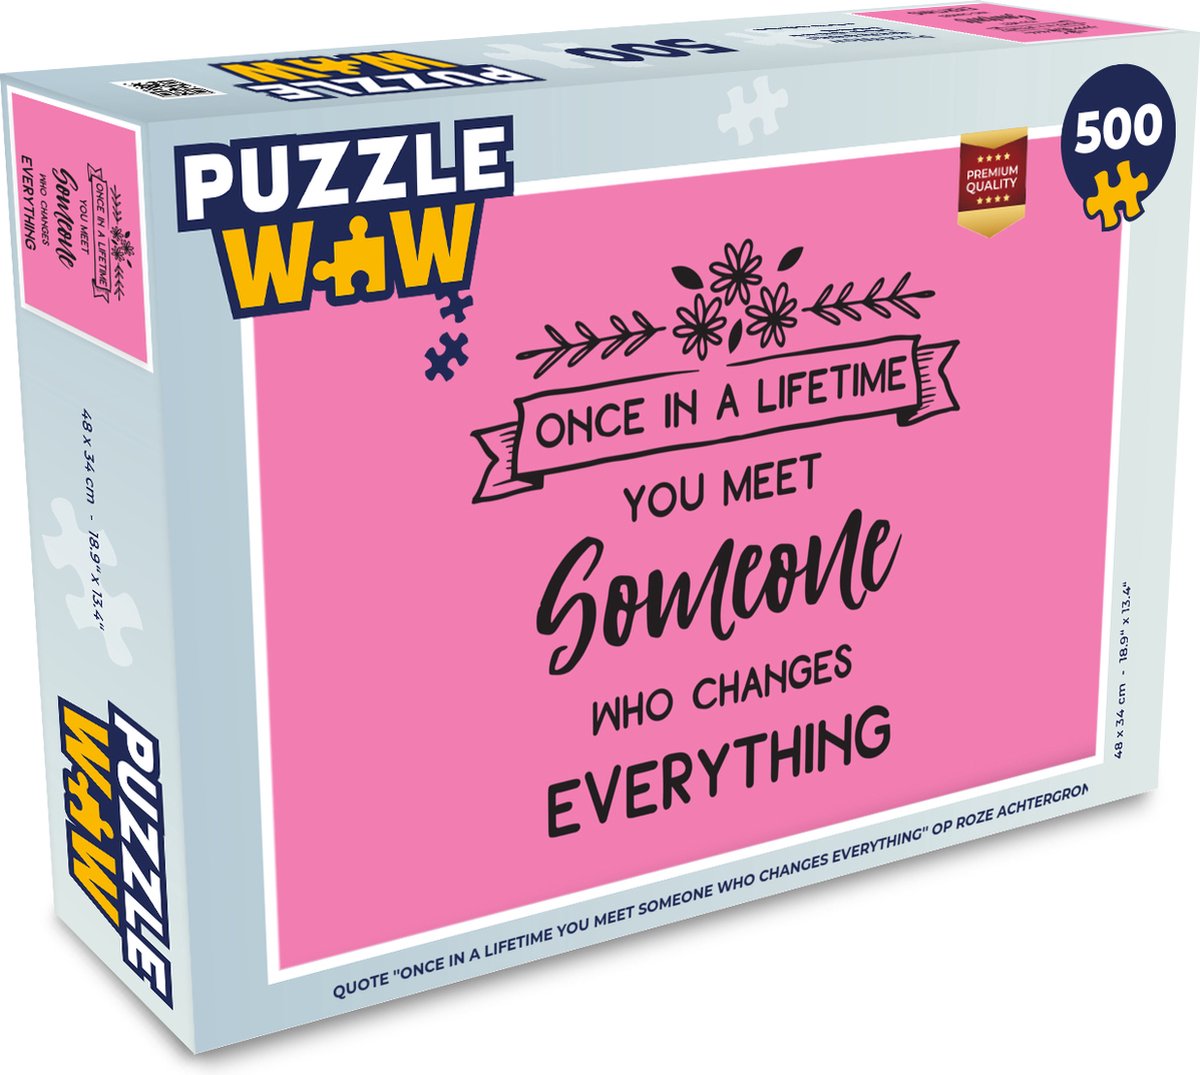 Afbeelding van product PuzzleWow  Puzzel Quote ''once in a lifetime you meet someone who changes everything'' op roze achtergrond - Legpuzzel - Puzzel 500 stukjes